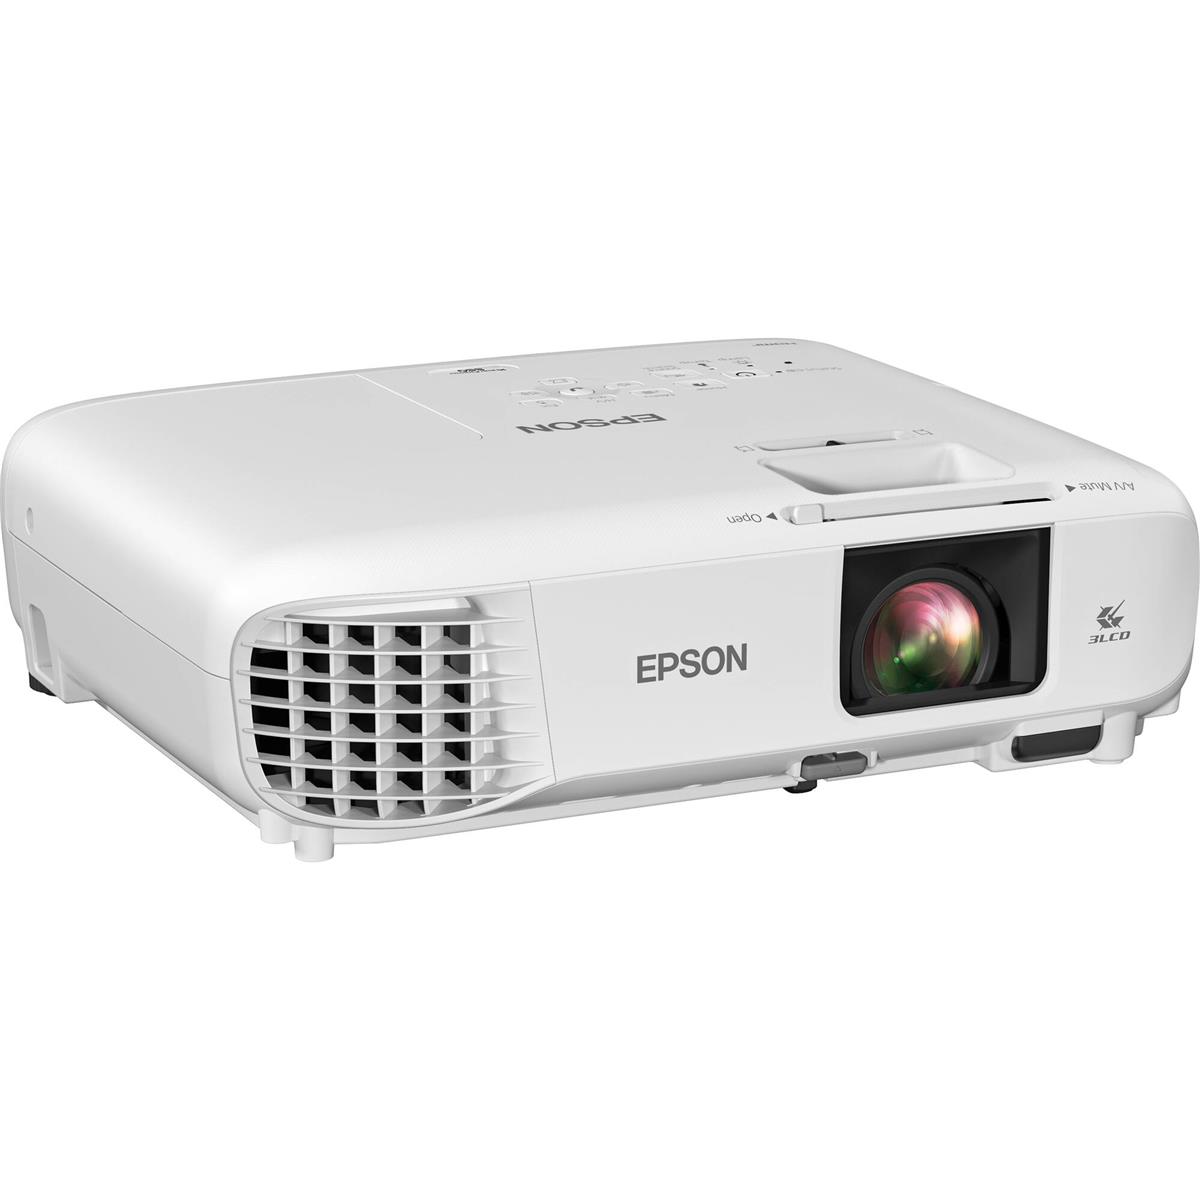 Epson Home Cinema 880 Full HD 3LCD Home Theater Projector, 3300 Lumens -  V11H979020